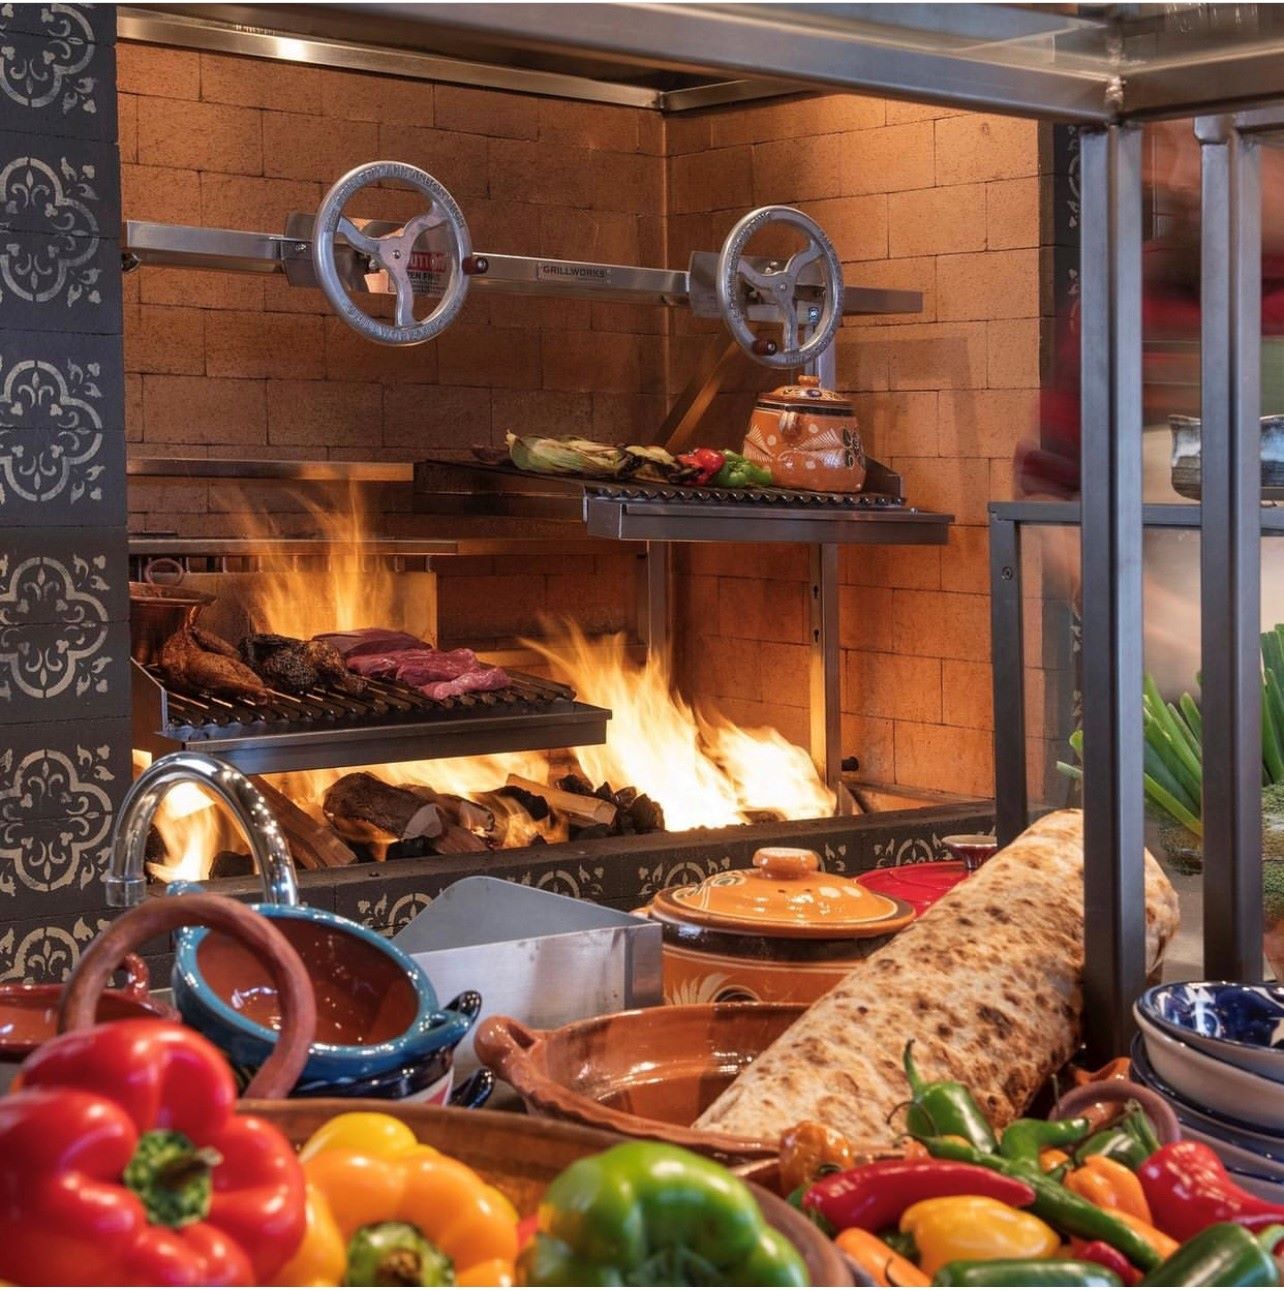 An image of the Santa Maria Grill from Jonah's Kitchen.